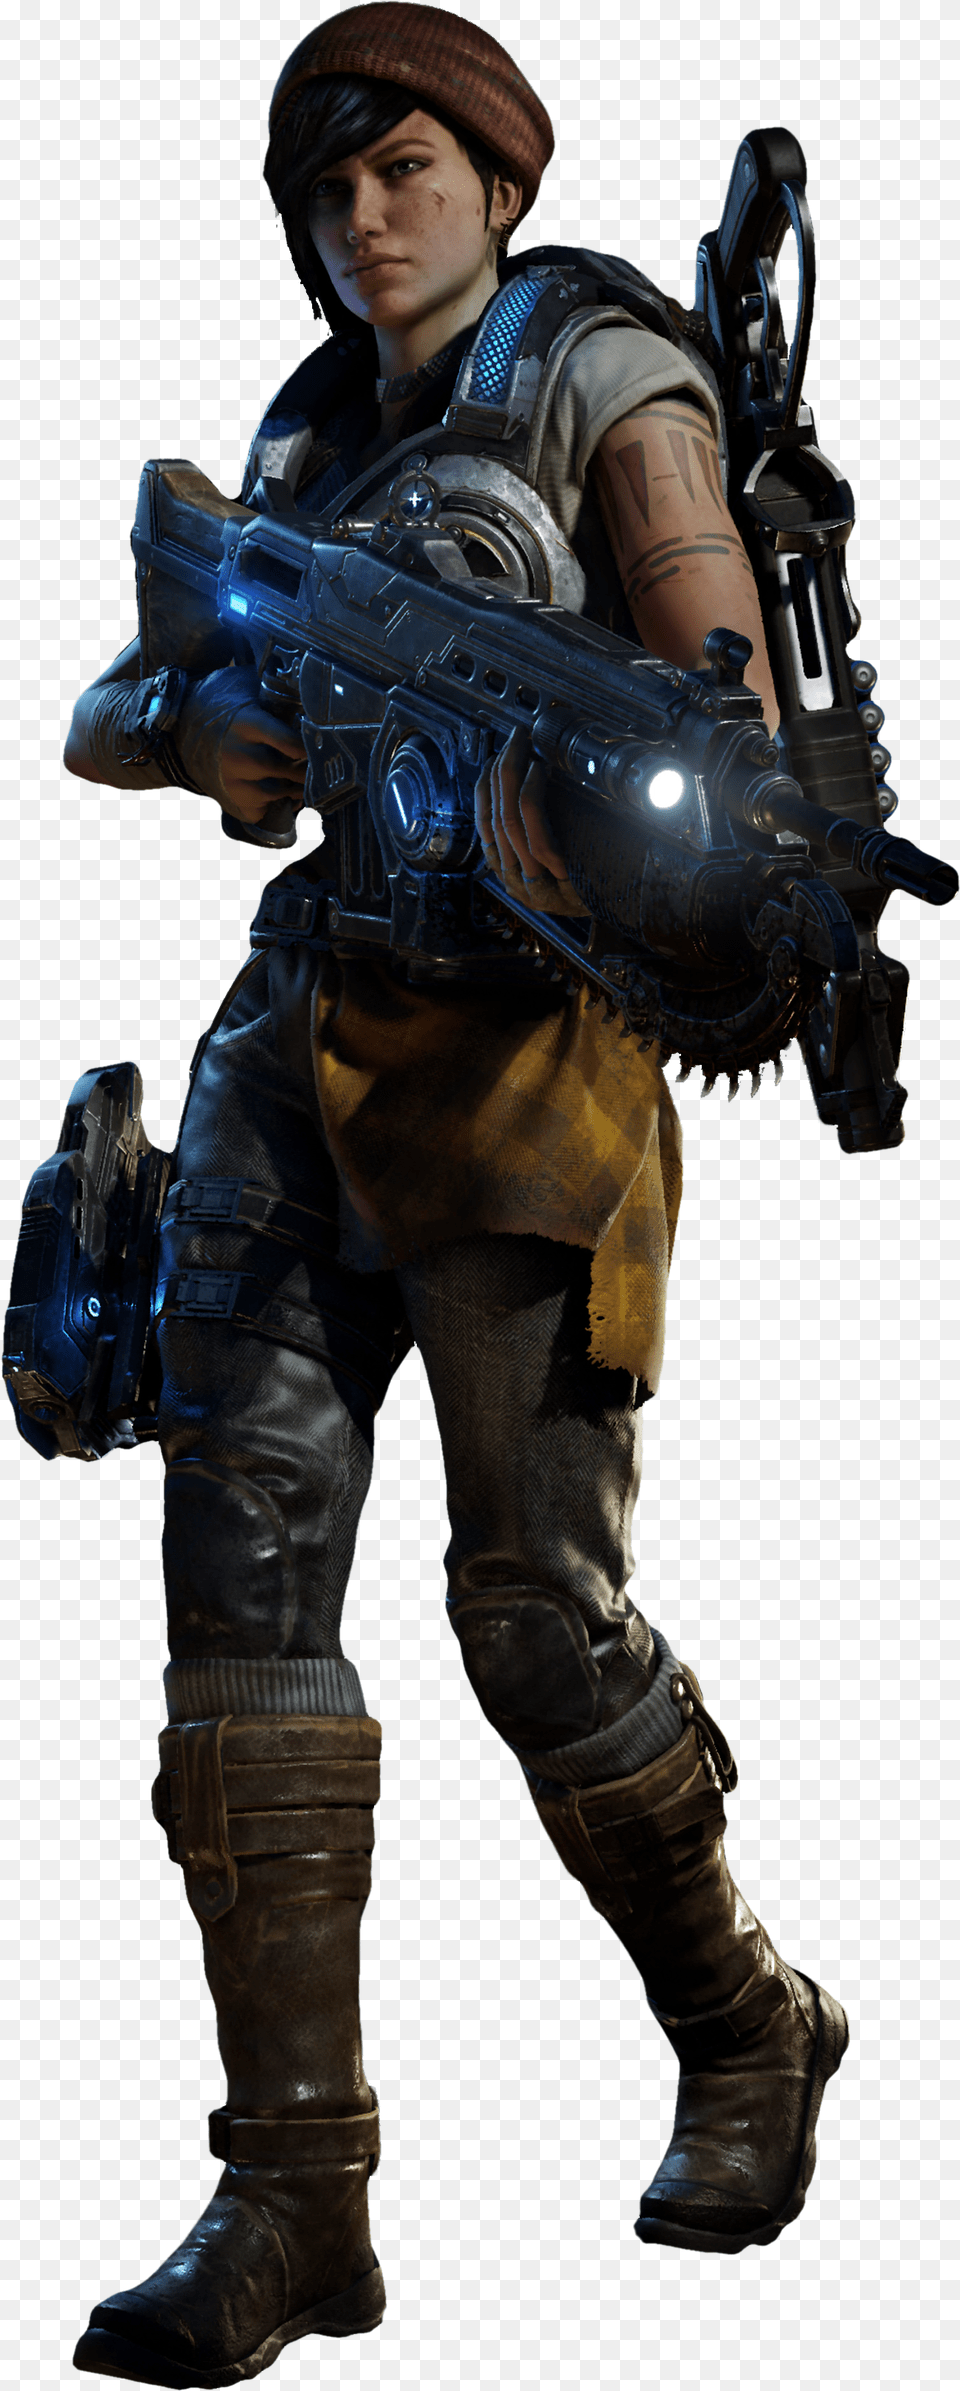 Wallpaper Pc Gaming Toy Person Gears Of War 4 Kait Kate Diaz Gears Of War 4, Adult, Man, Male, Shoe Png Image